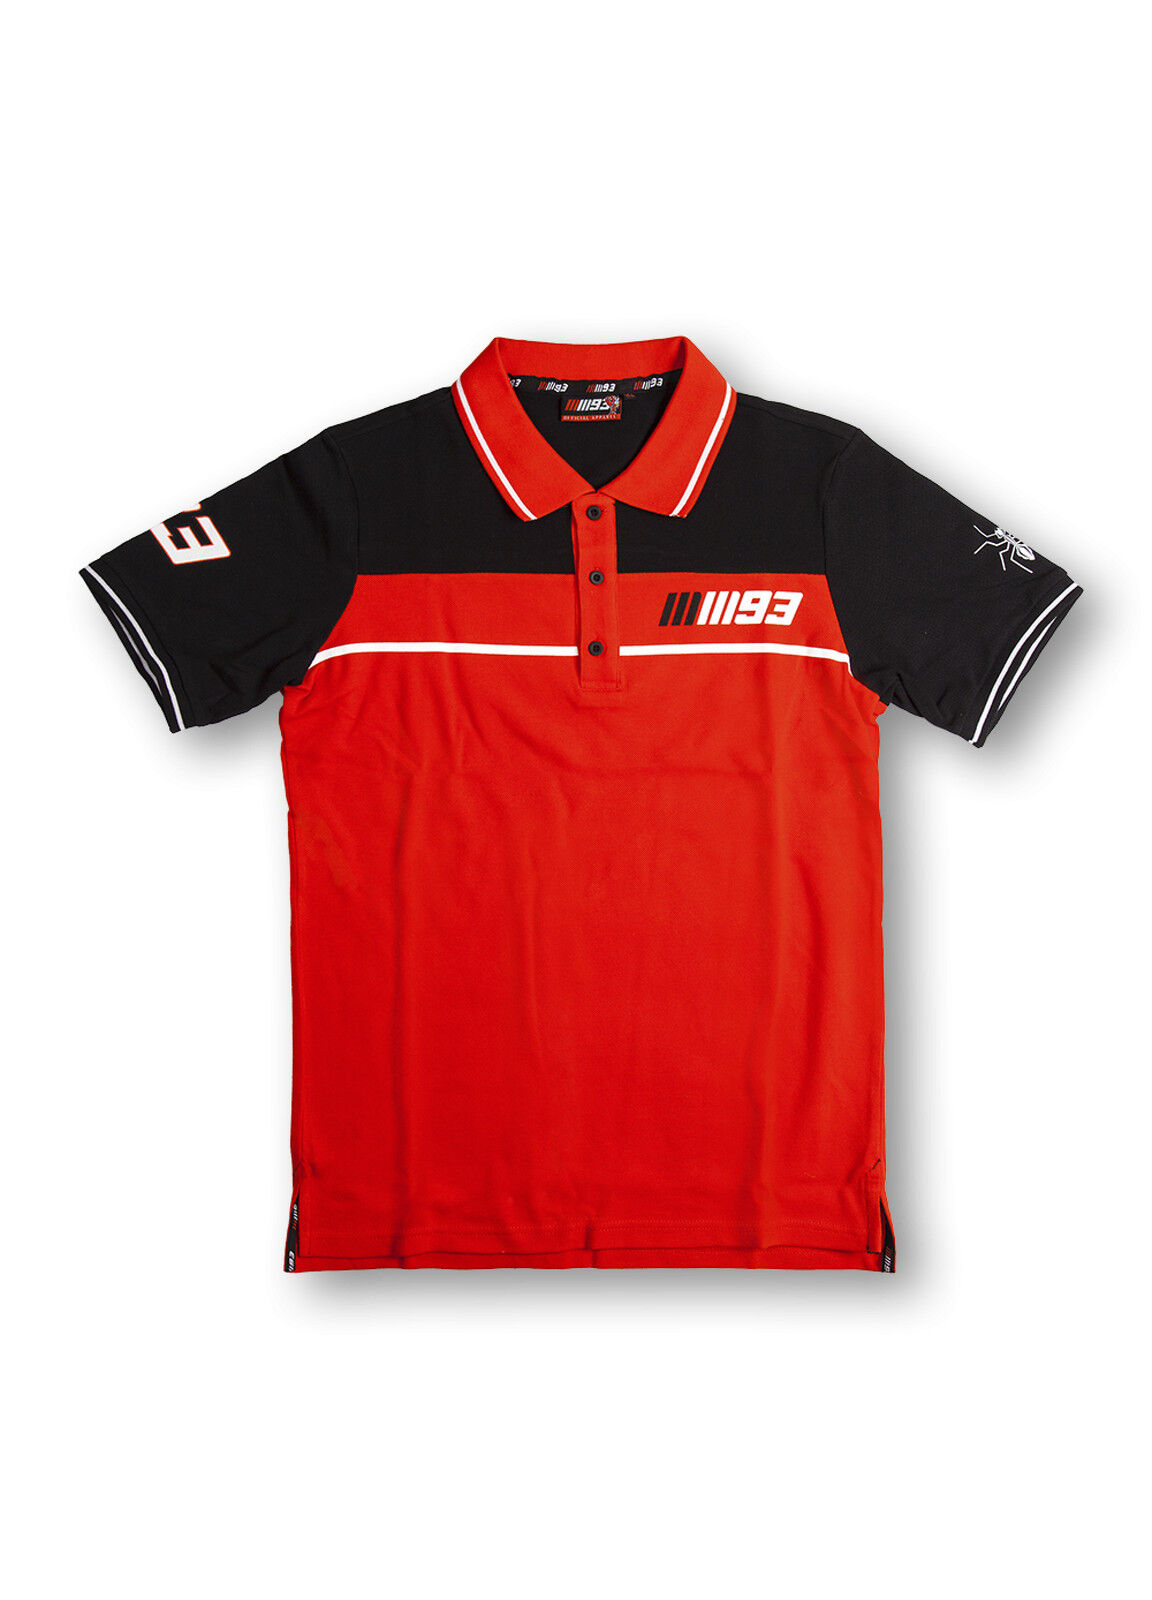 New Official Marc Marquez 93 Polo - Mmmpo 156907